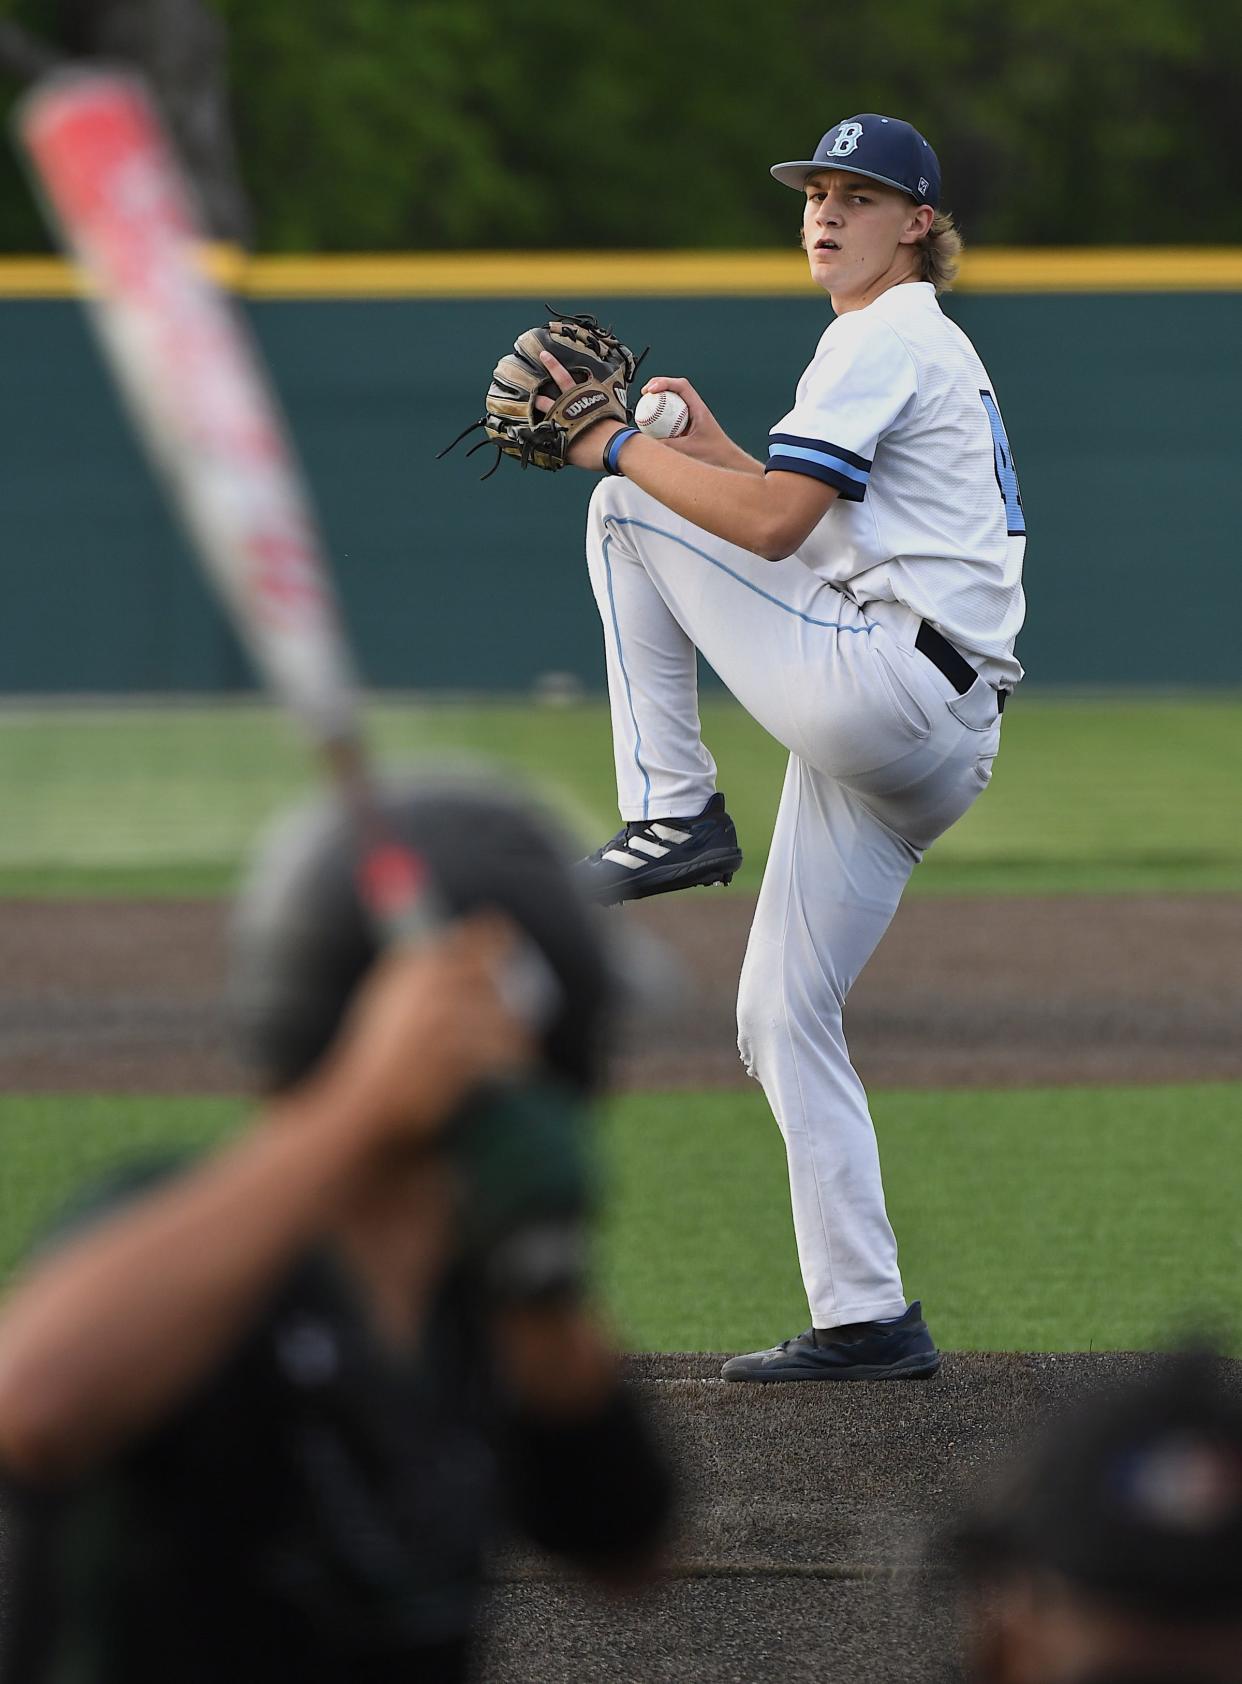 Bartlesville High School senior Brenden Asher (4) faces his final batter with a strikeout in a Bruin uniform in Bartlesville during baseball action earlier in the season.